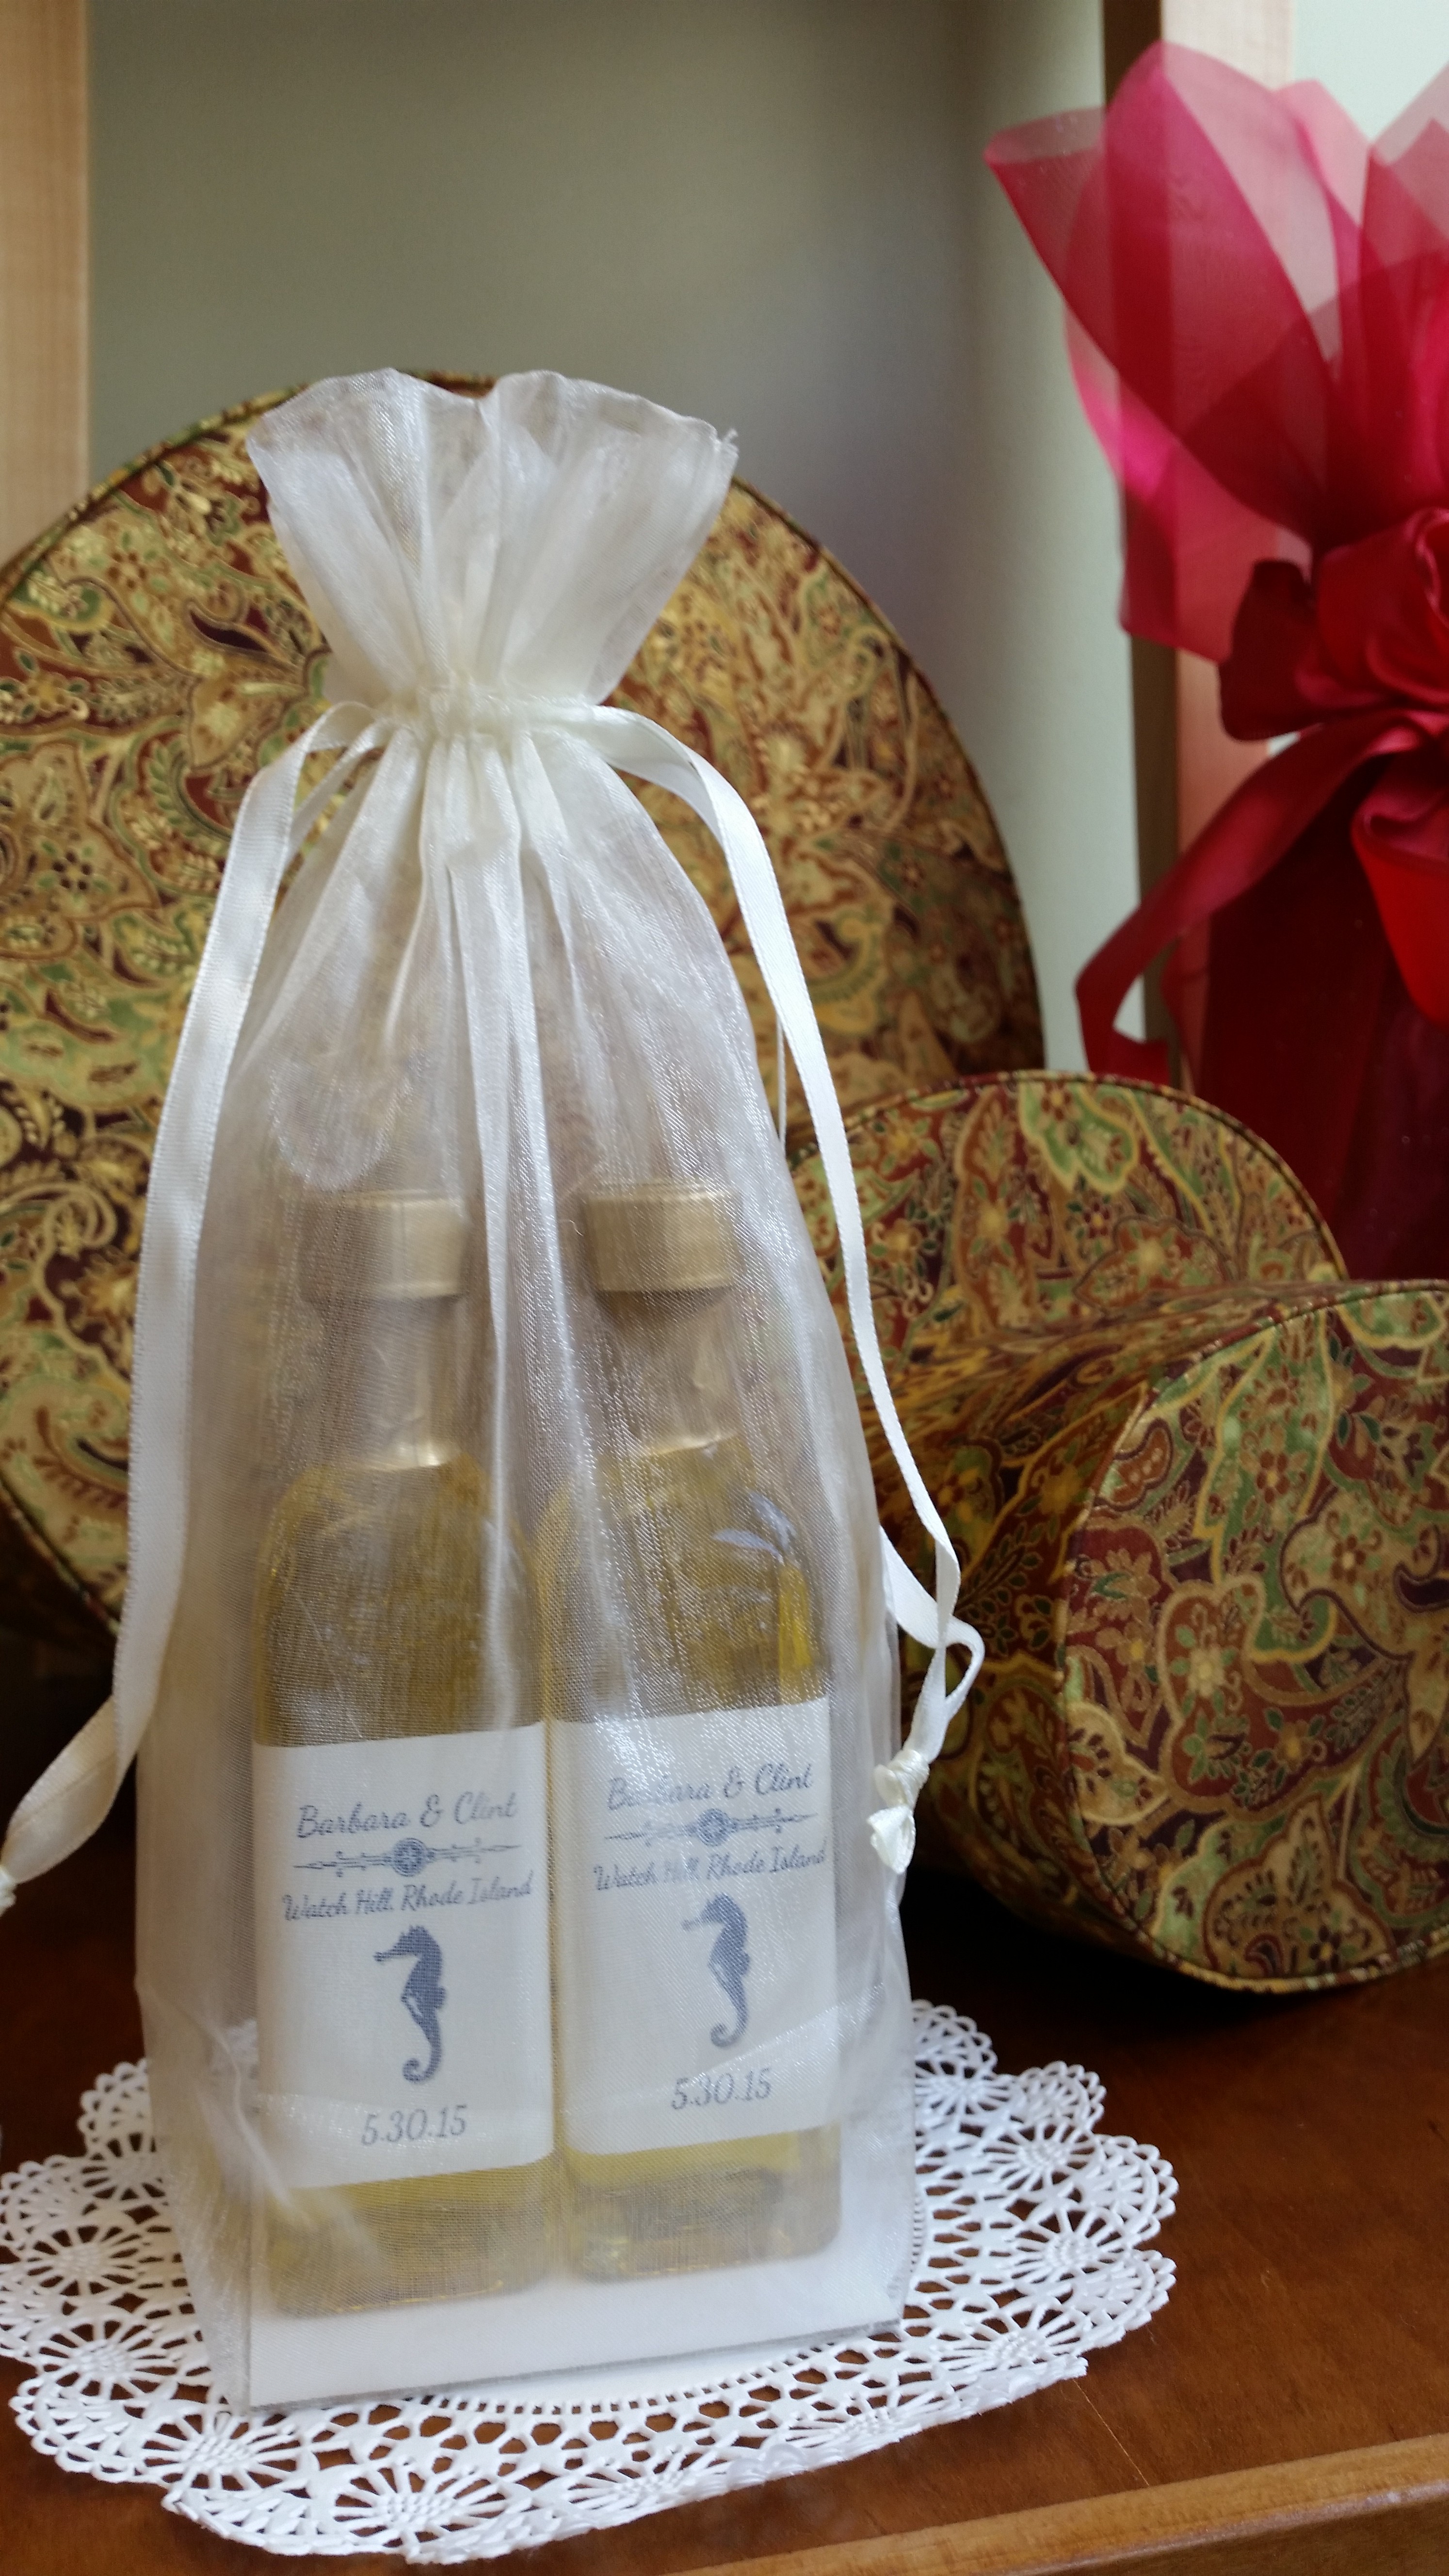 Wedding Favors Bridal Showers Creative Gifts Specialty Vinegars